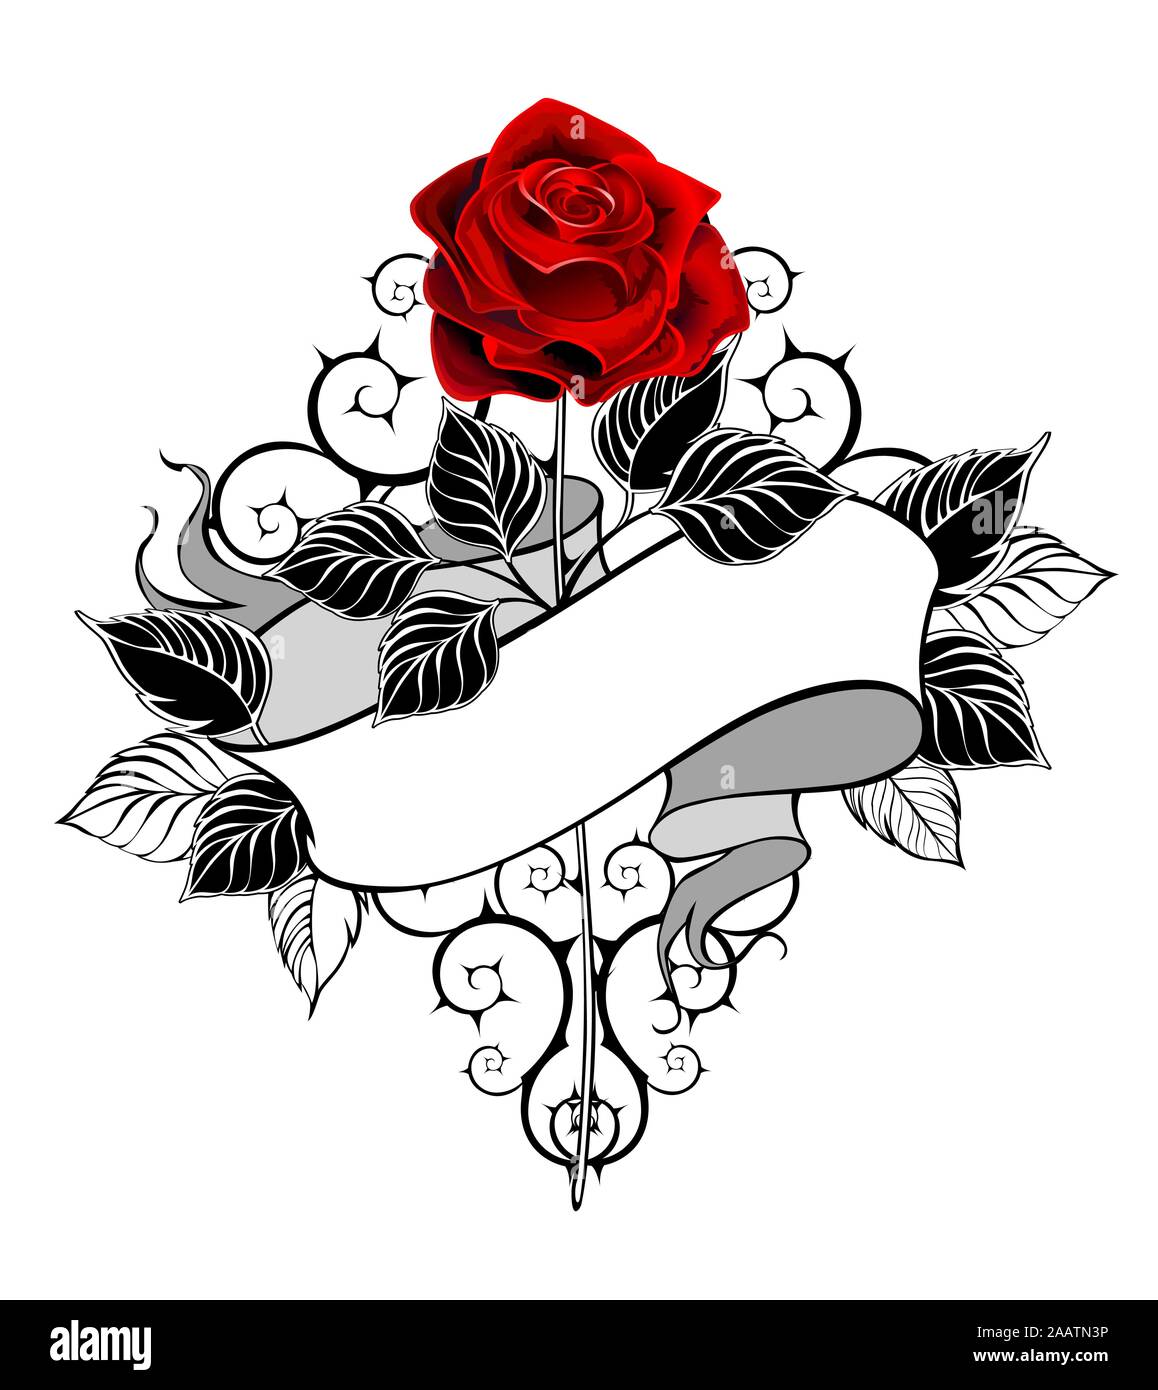 Sketch tattoo Rose on a long stem and ribbon Color Vintage style   Illustration